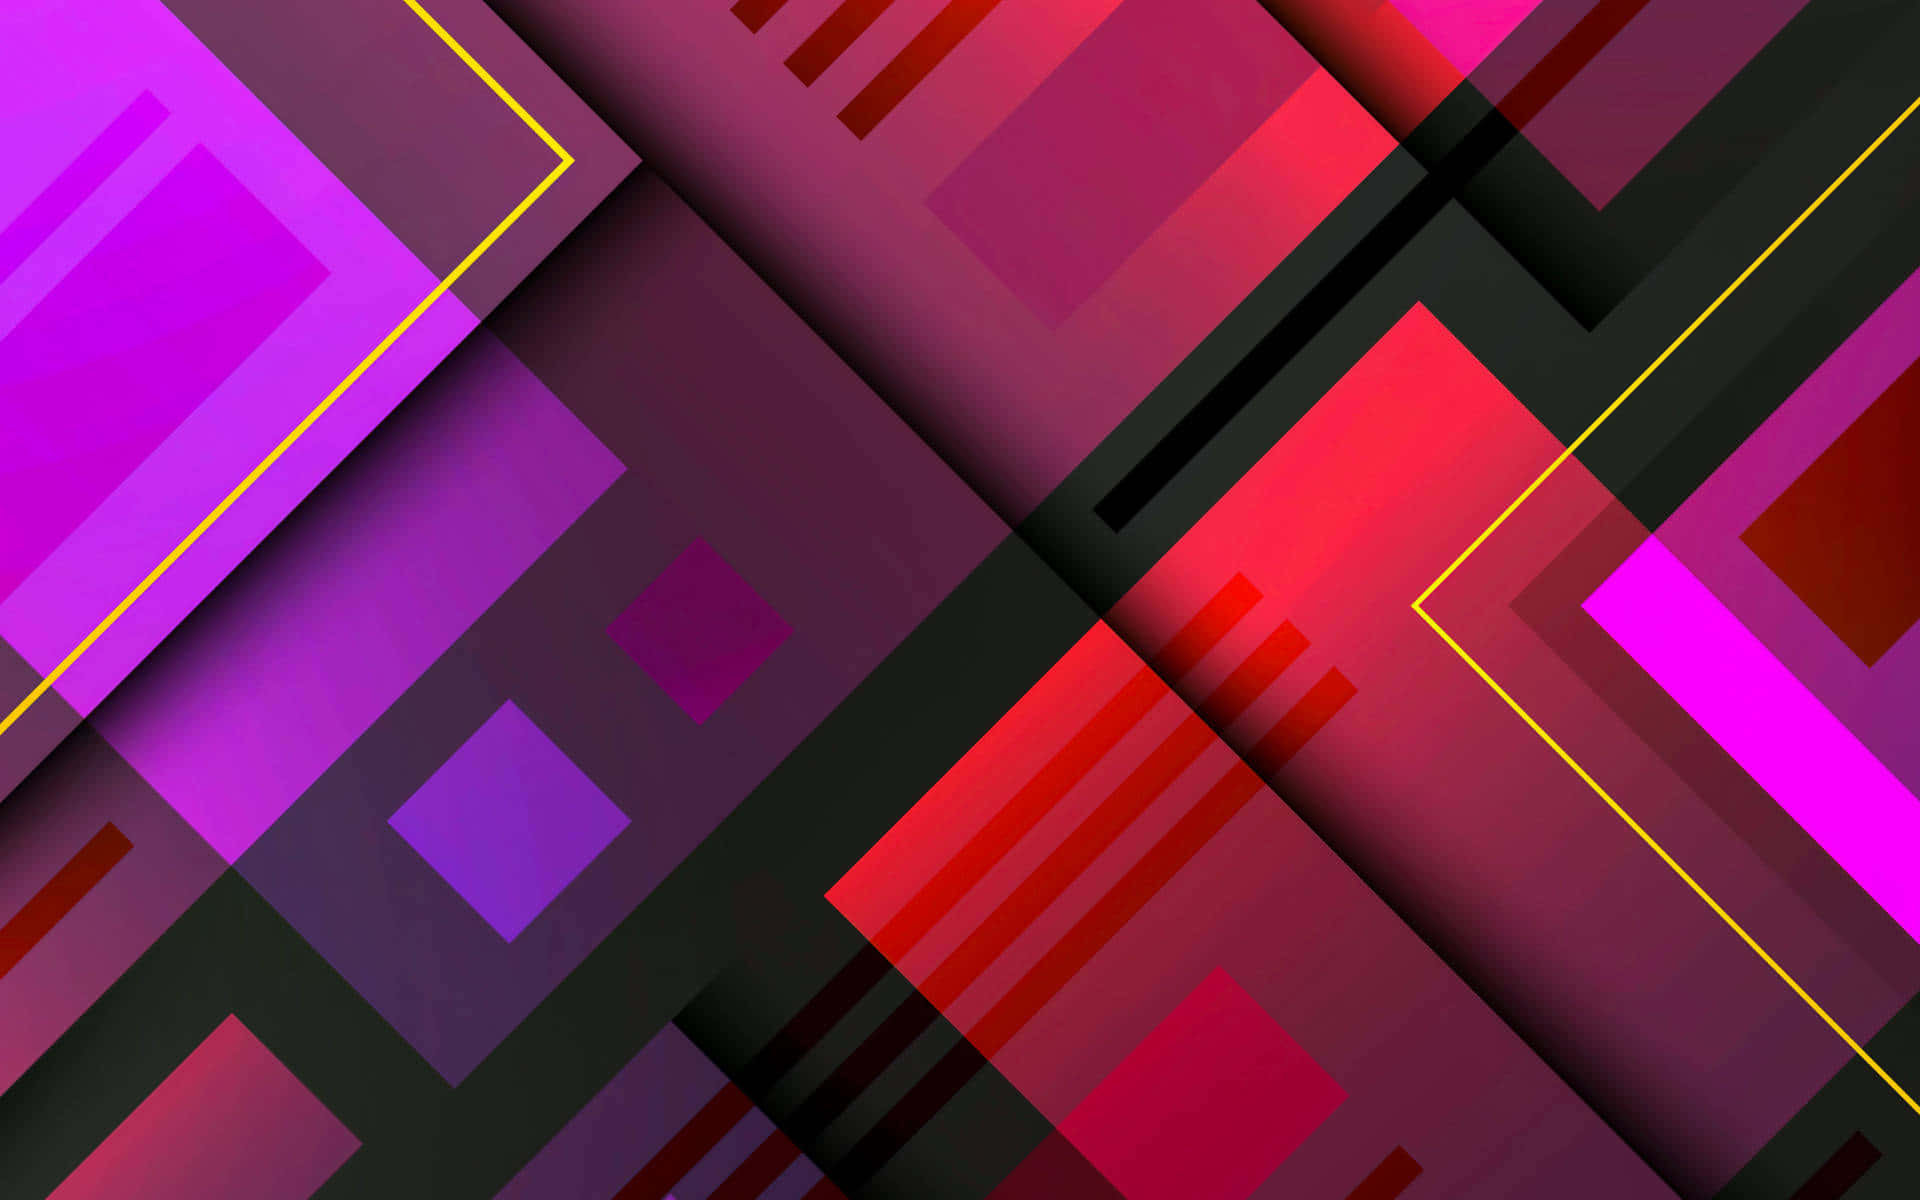 An Abstract Representation of Material Design